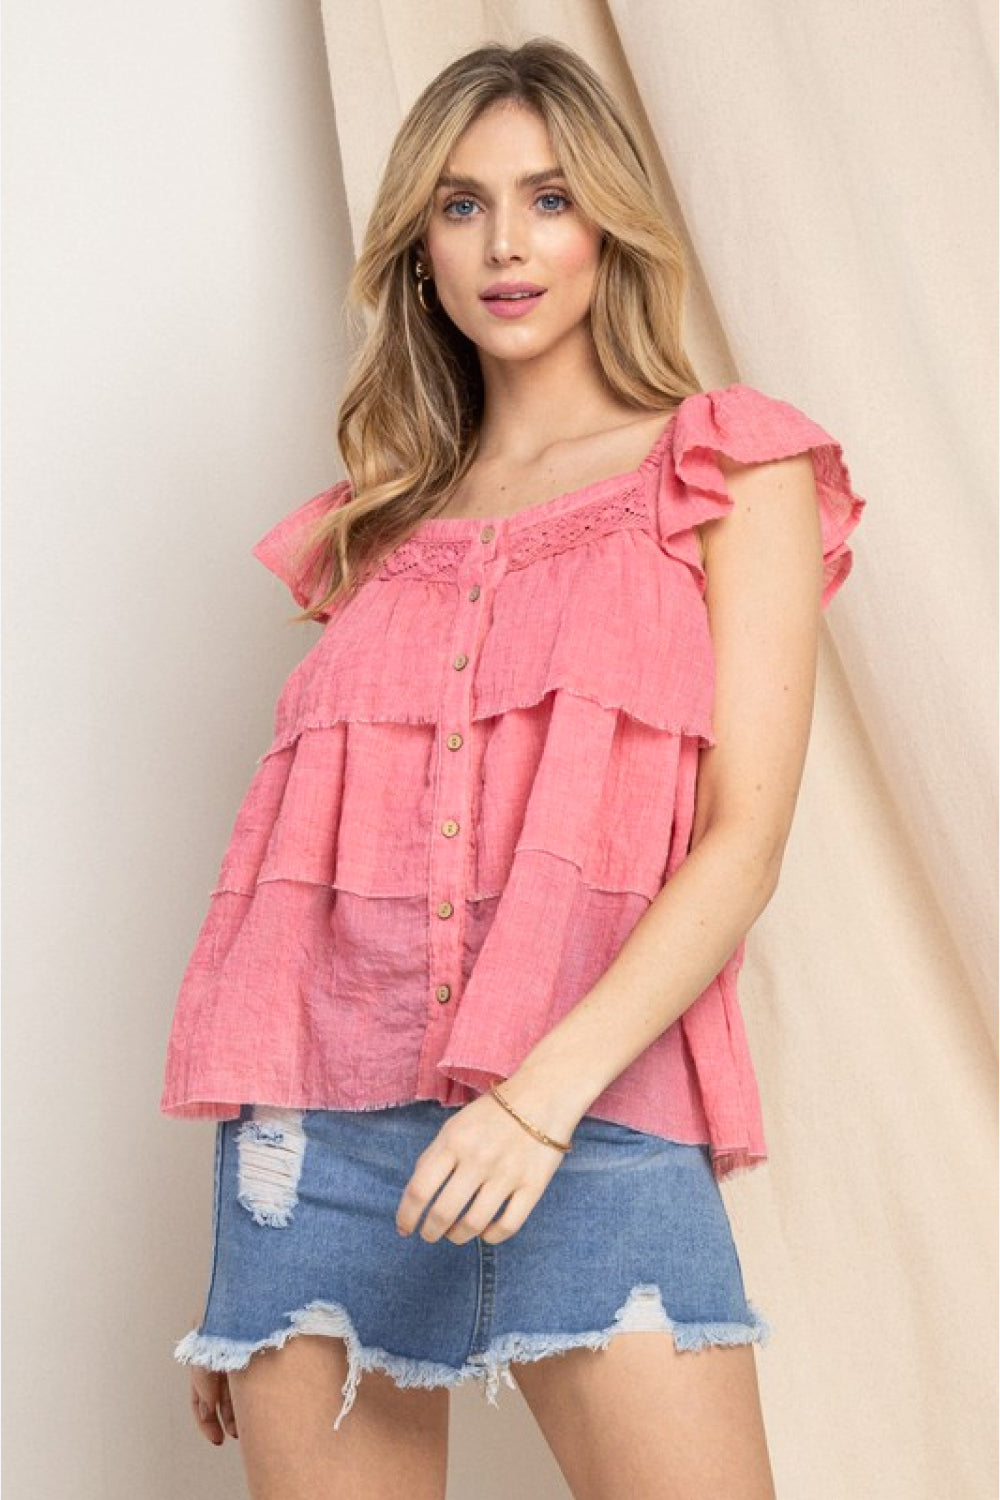 ODDI Full Size Buttoned Ruffled Top - ONLINE ONLY 2-10 DAY SHIPPING